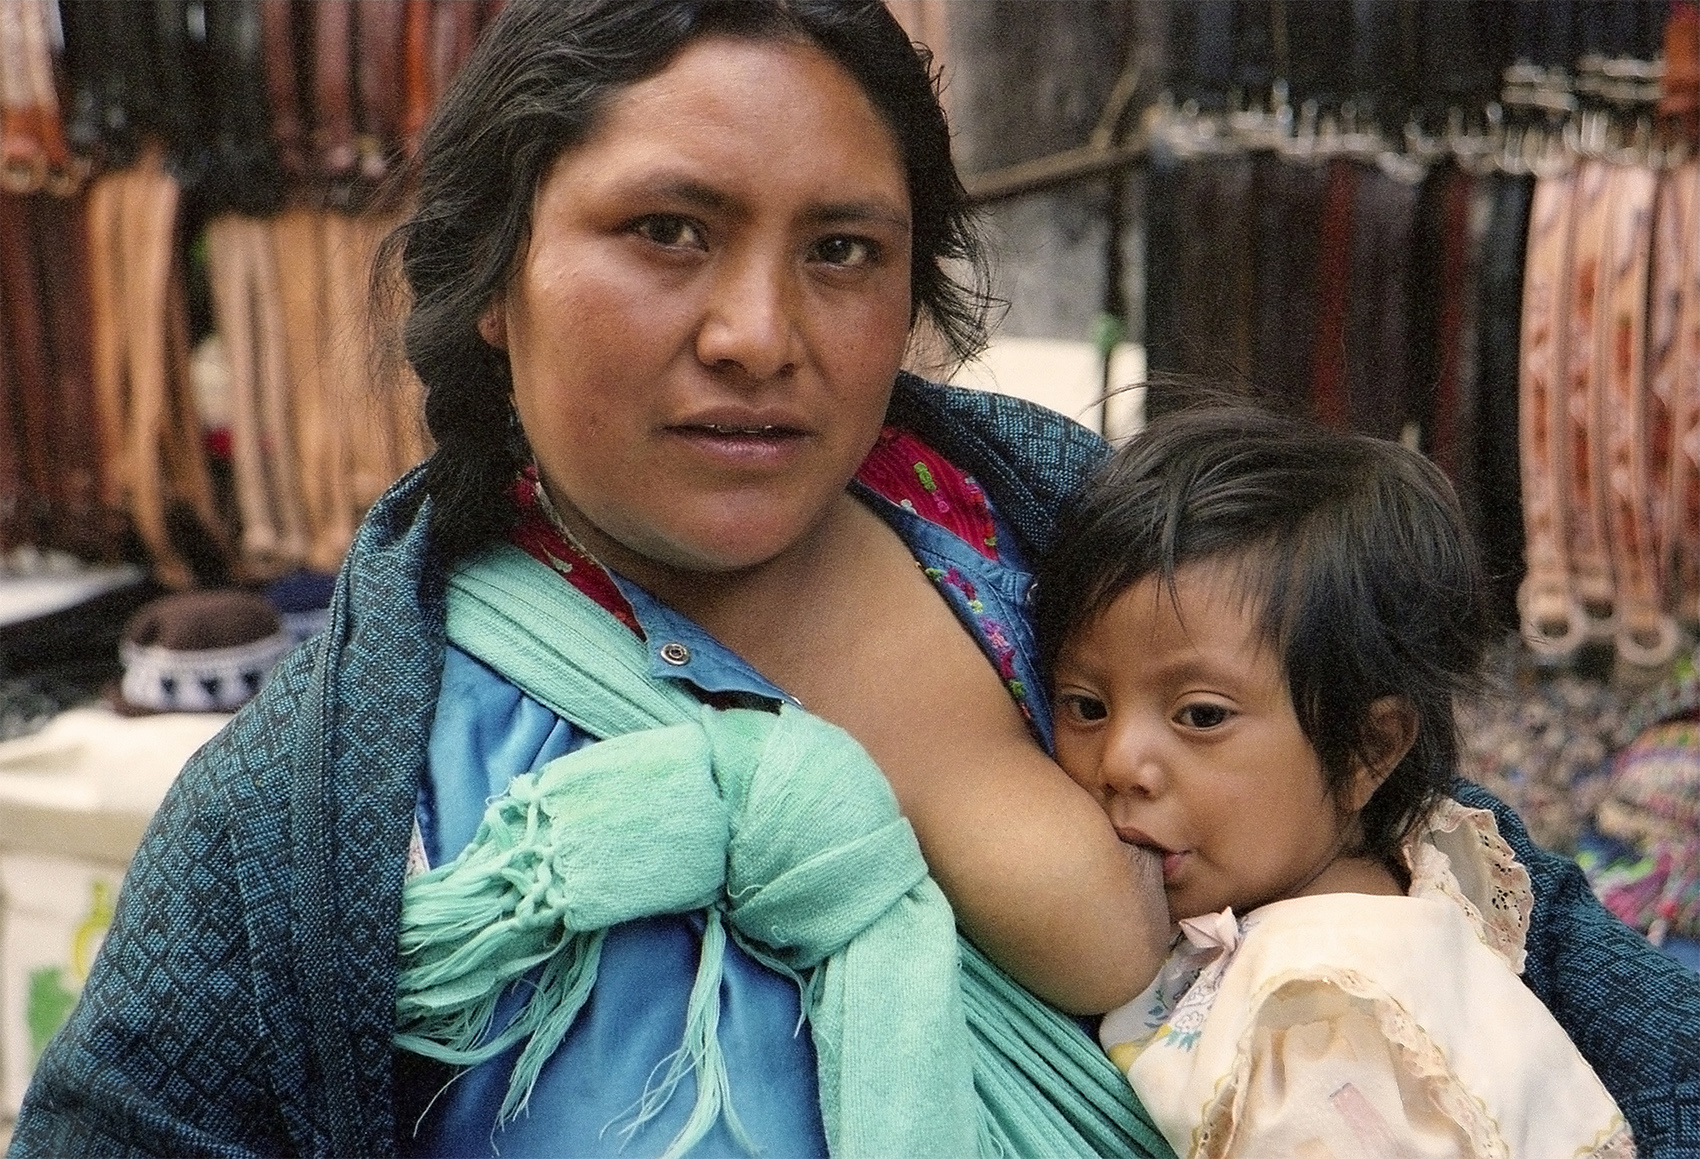 photo of a woman breastfeeding her child in Chiapas Mexico